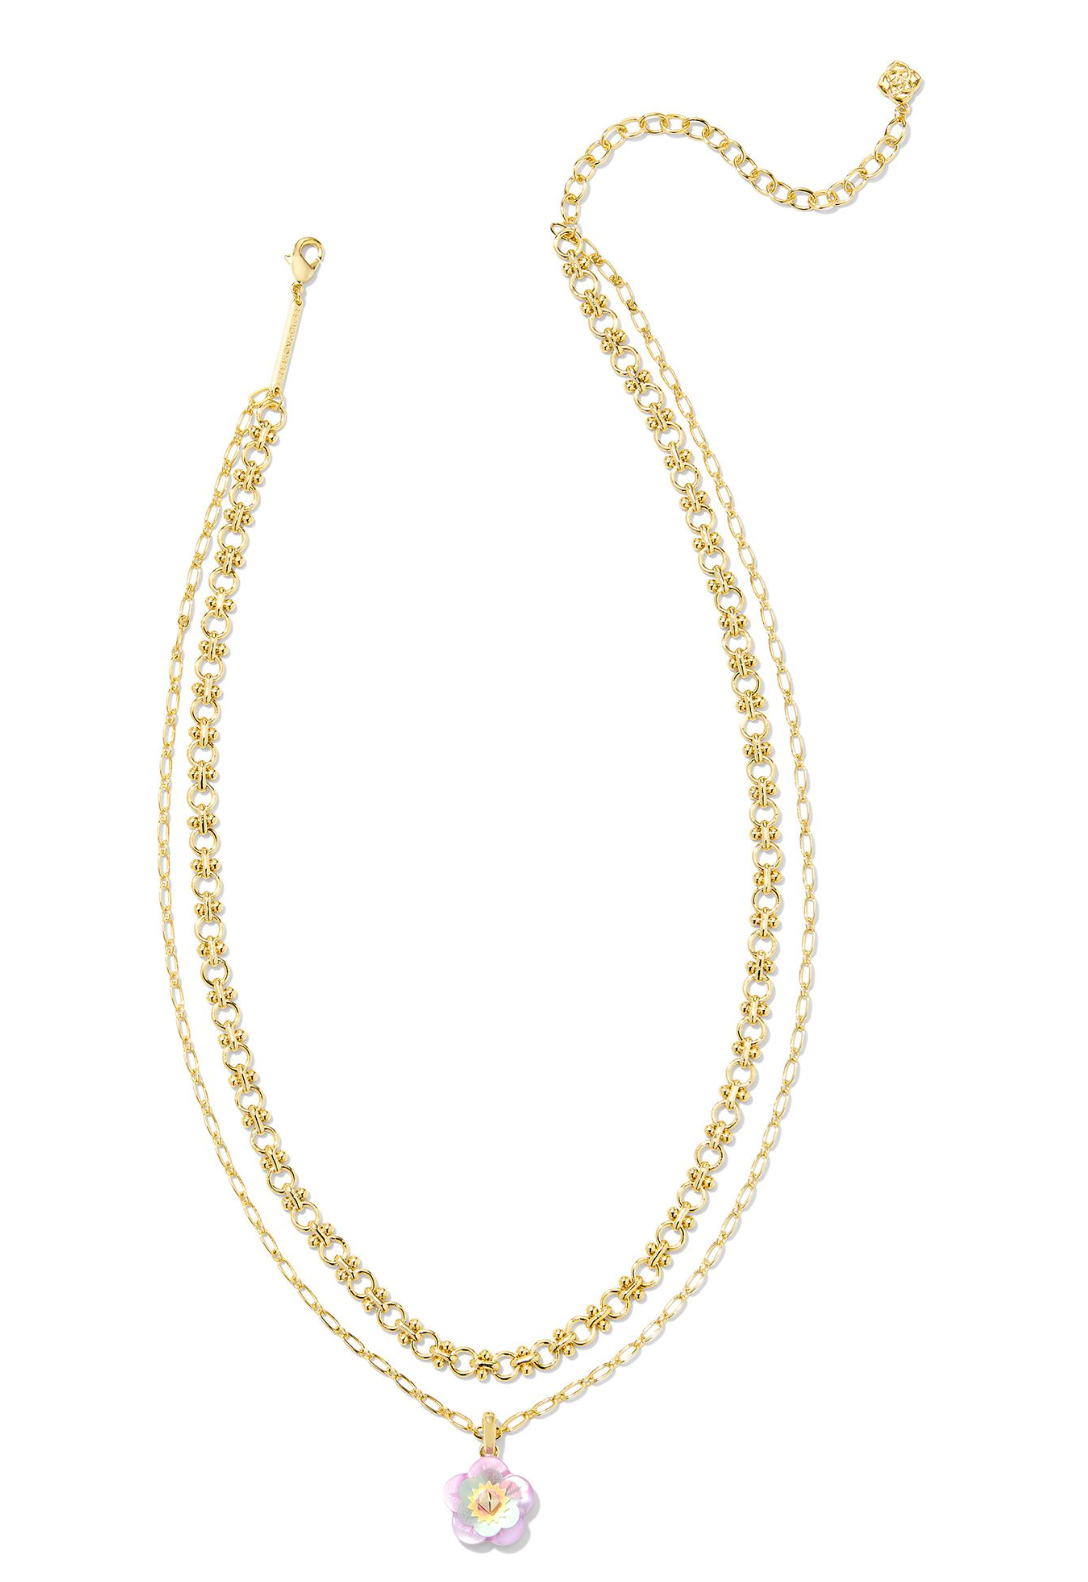 Deliah Gold Multi Strand Necklace in Pastel Mix | KENDRA SCOTT - The Street Boutique 